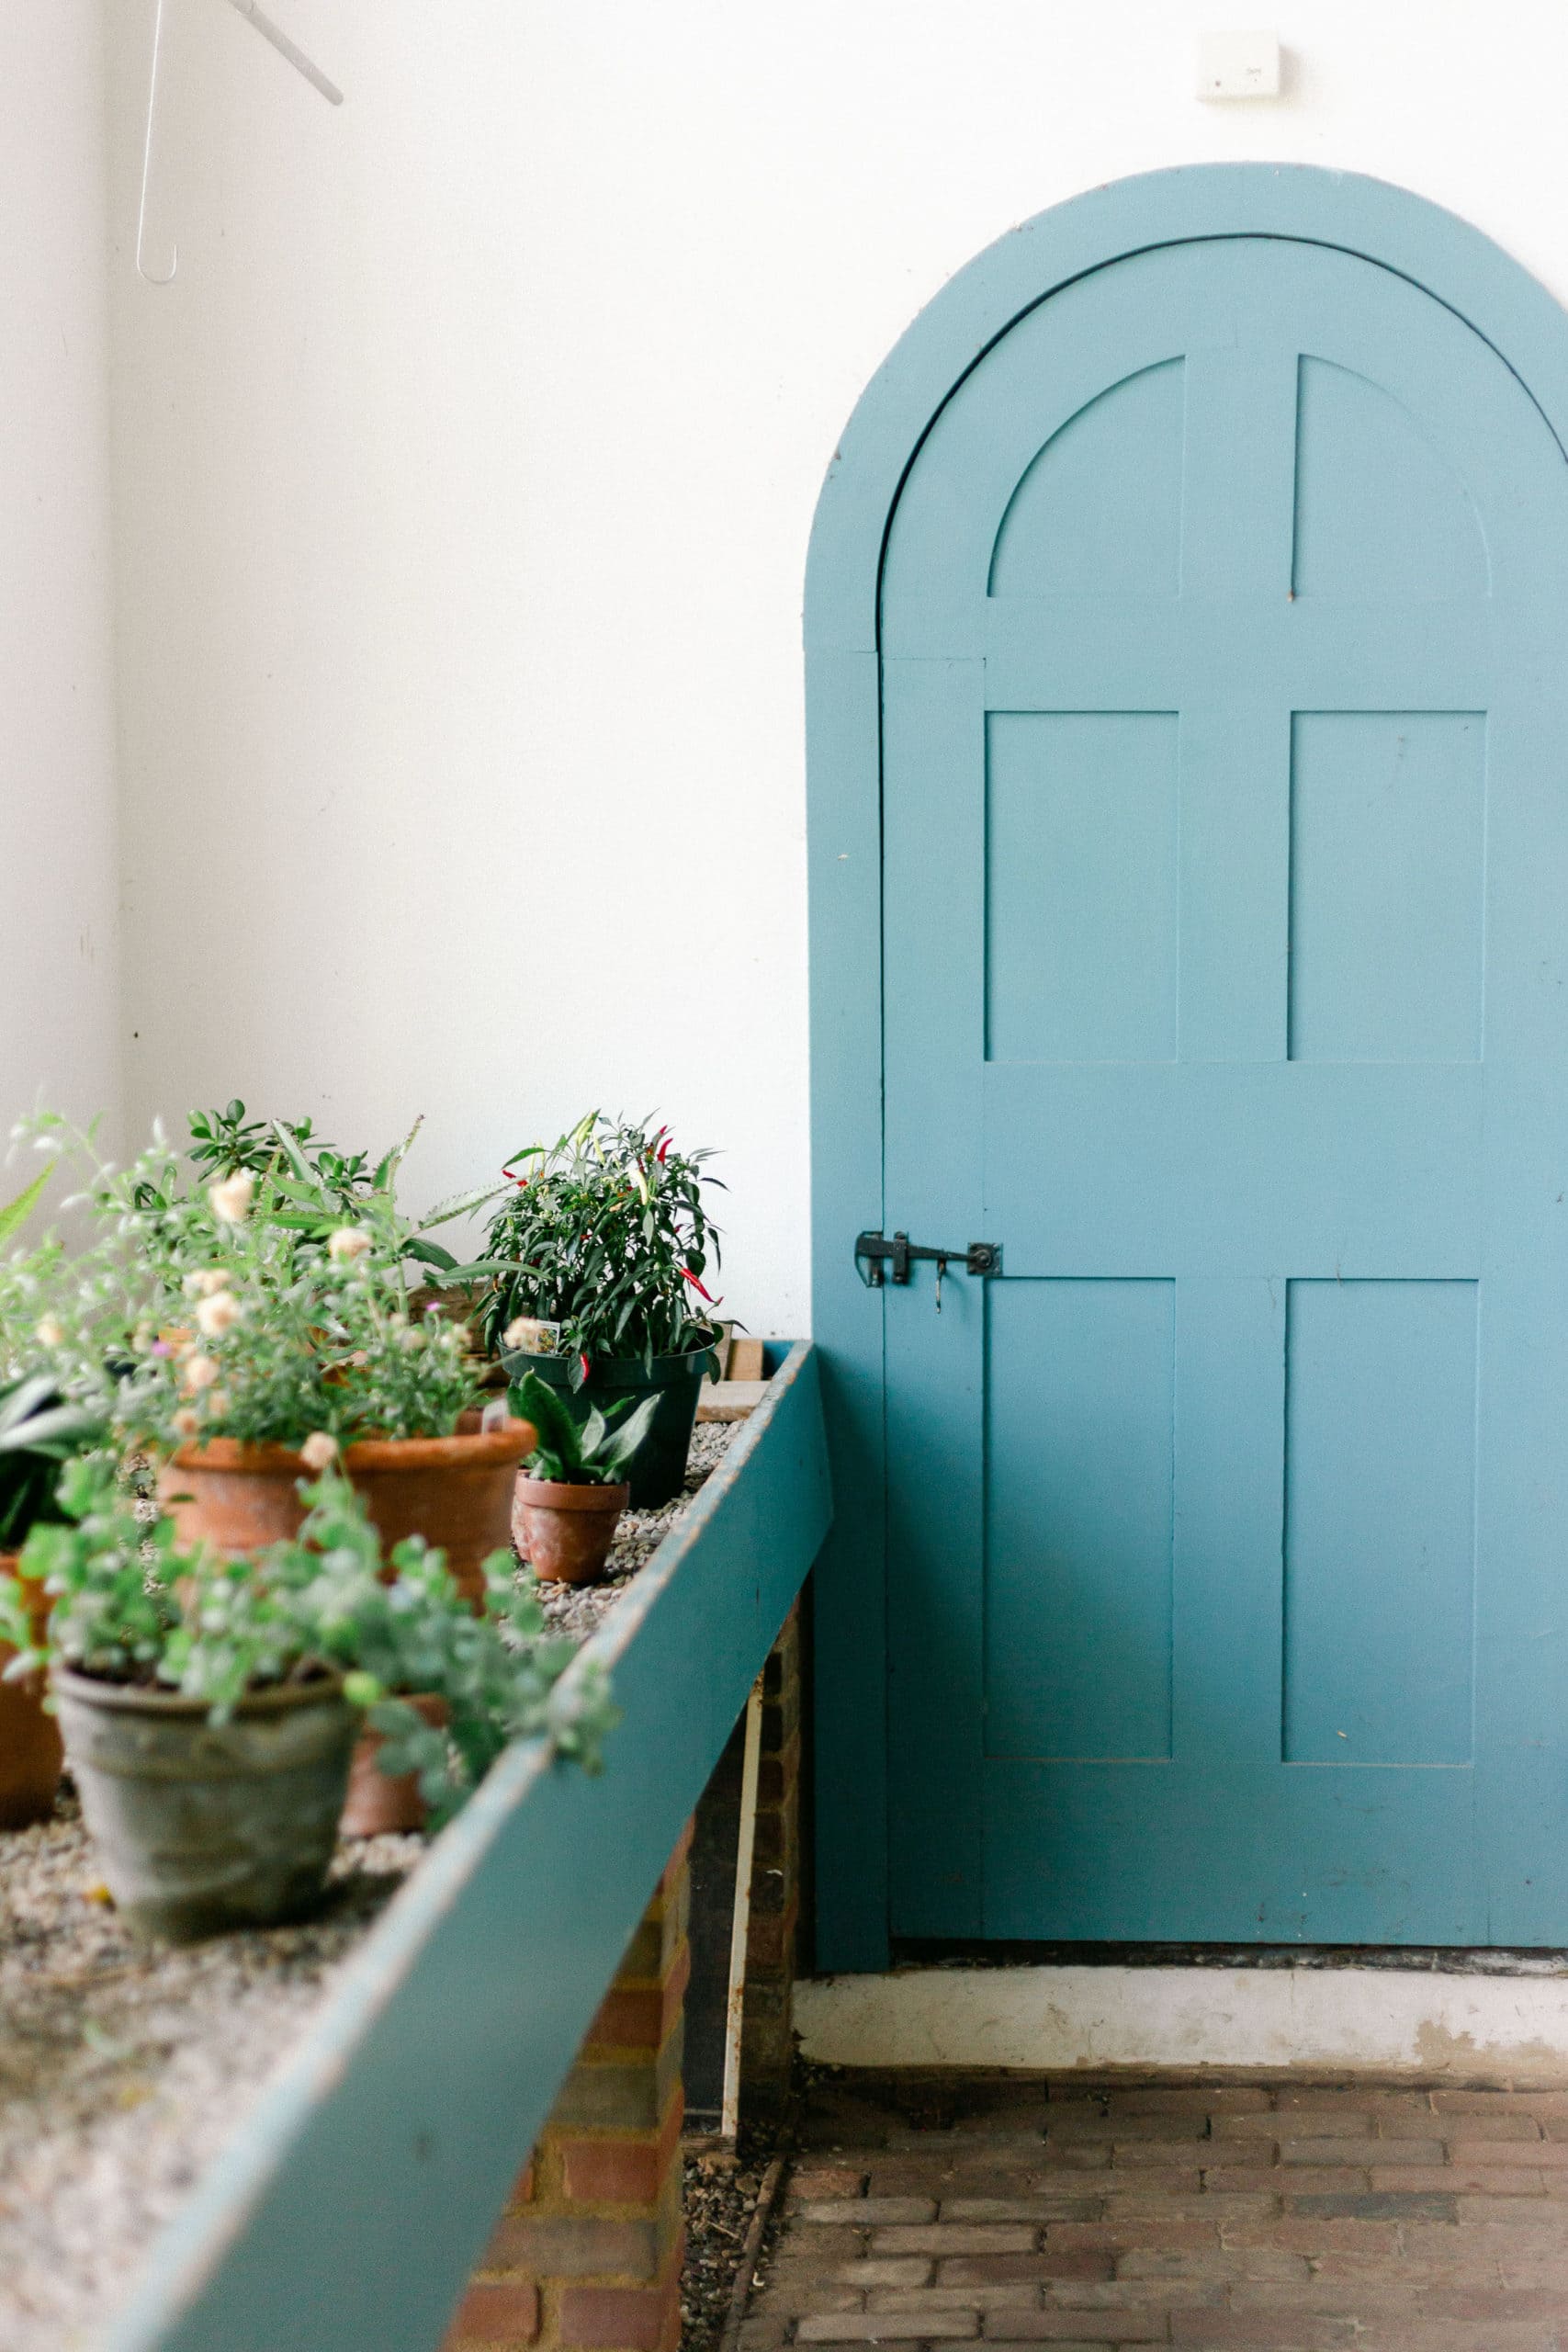 An array of planters resting on a potting bench, set against the backdrop of a charming blue arched front door, enhancing the inviting ambiance of the entryway.